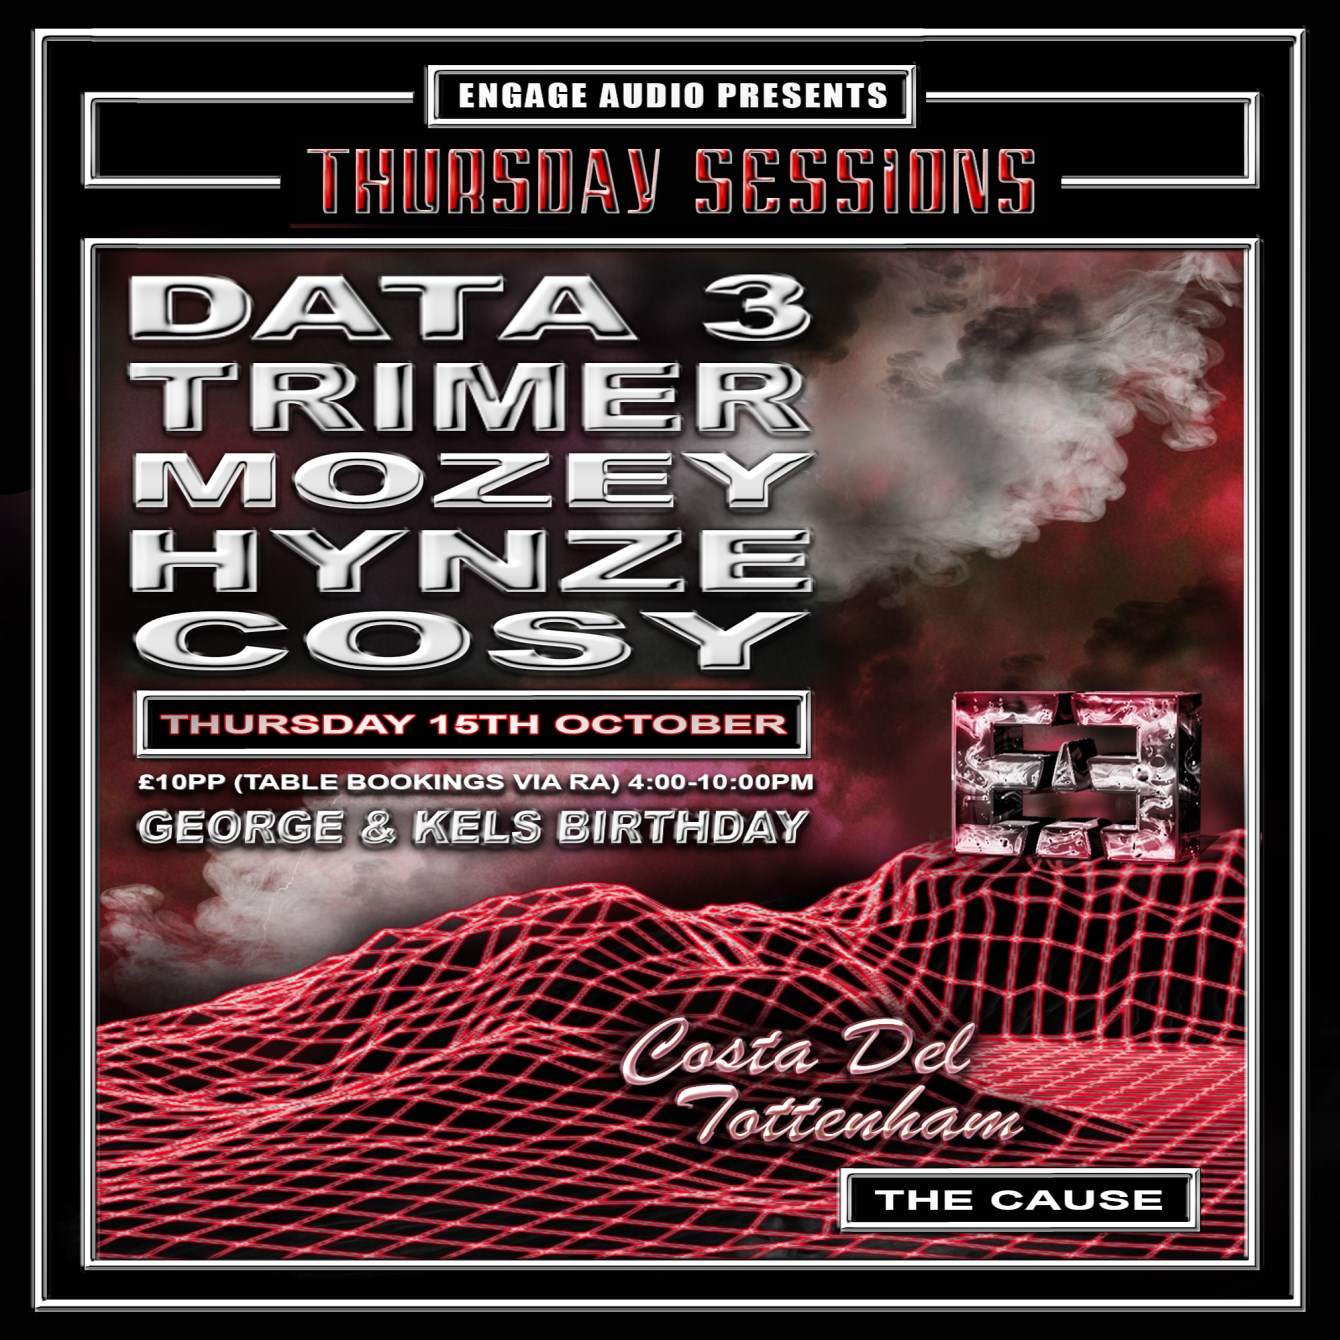 Engage Audio presents Thursday Sessions with Data 3, Trimer, Mozer, Hynze and Cosy - フライヤー表